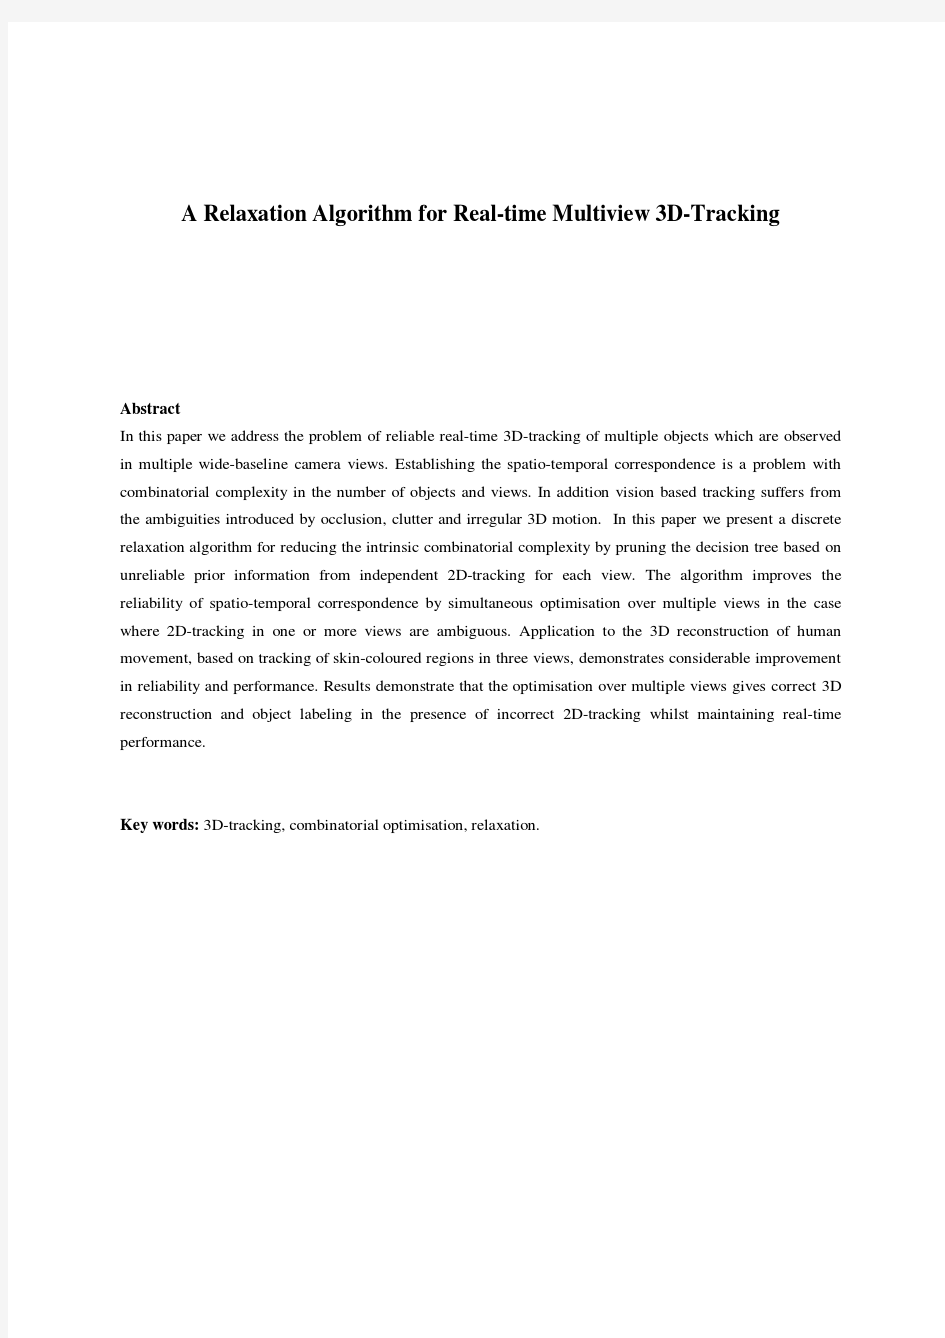 Abstract A Relaxation Algorithm for Real-time Multiple View 3D-Tracking